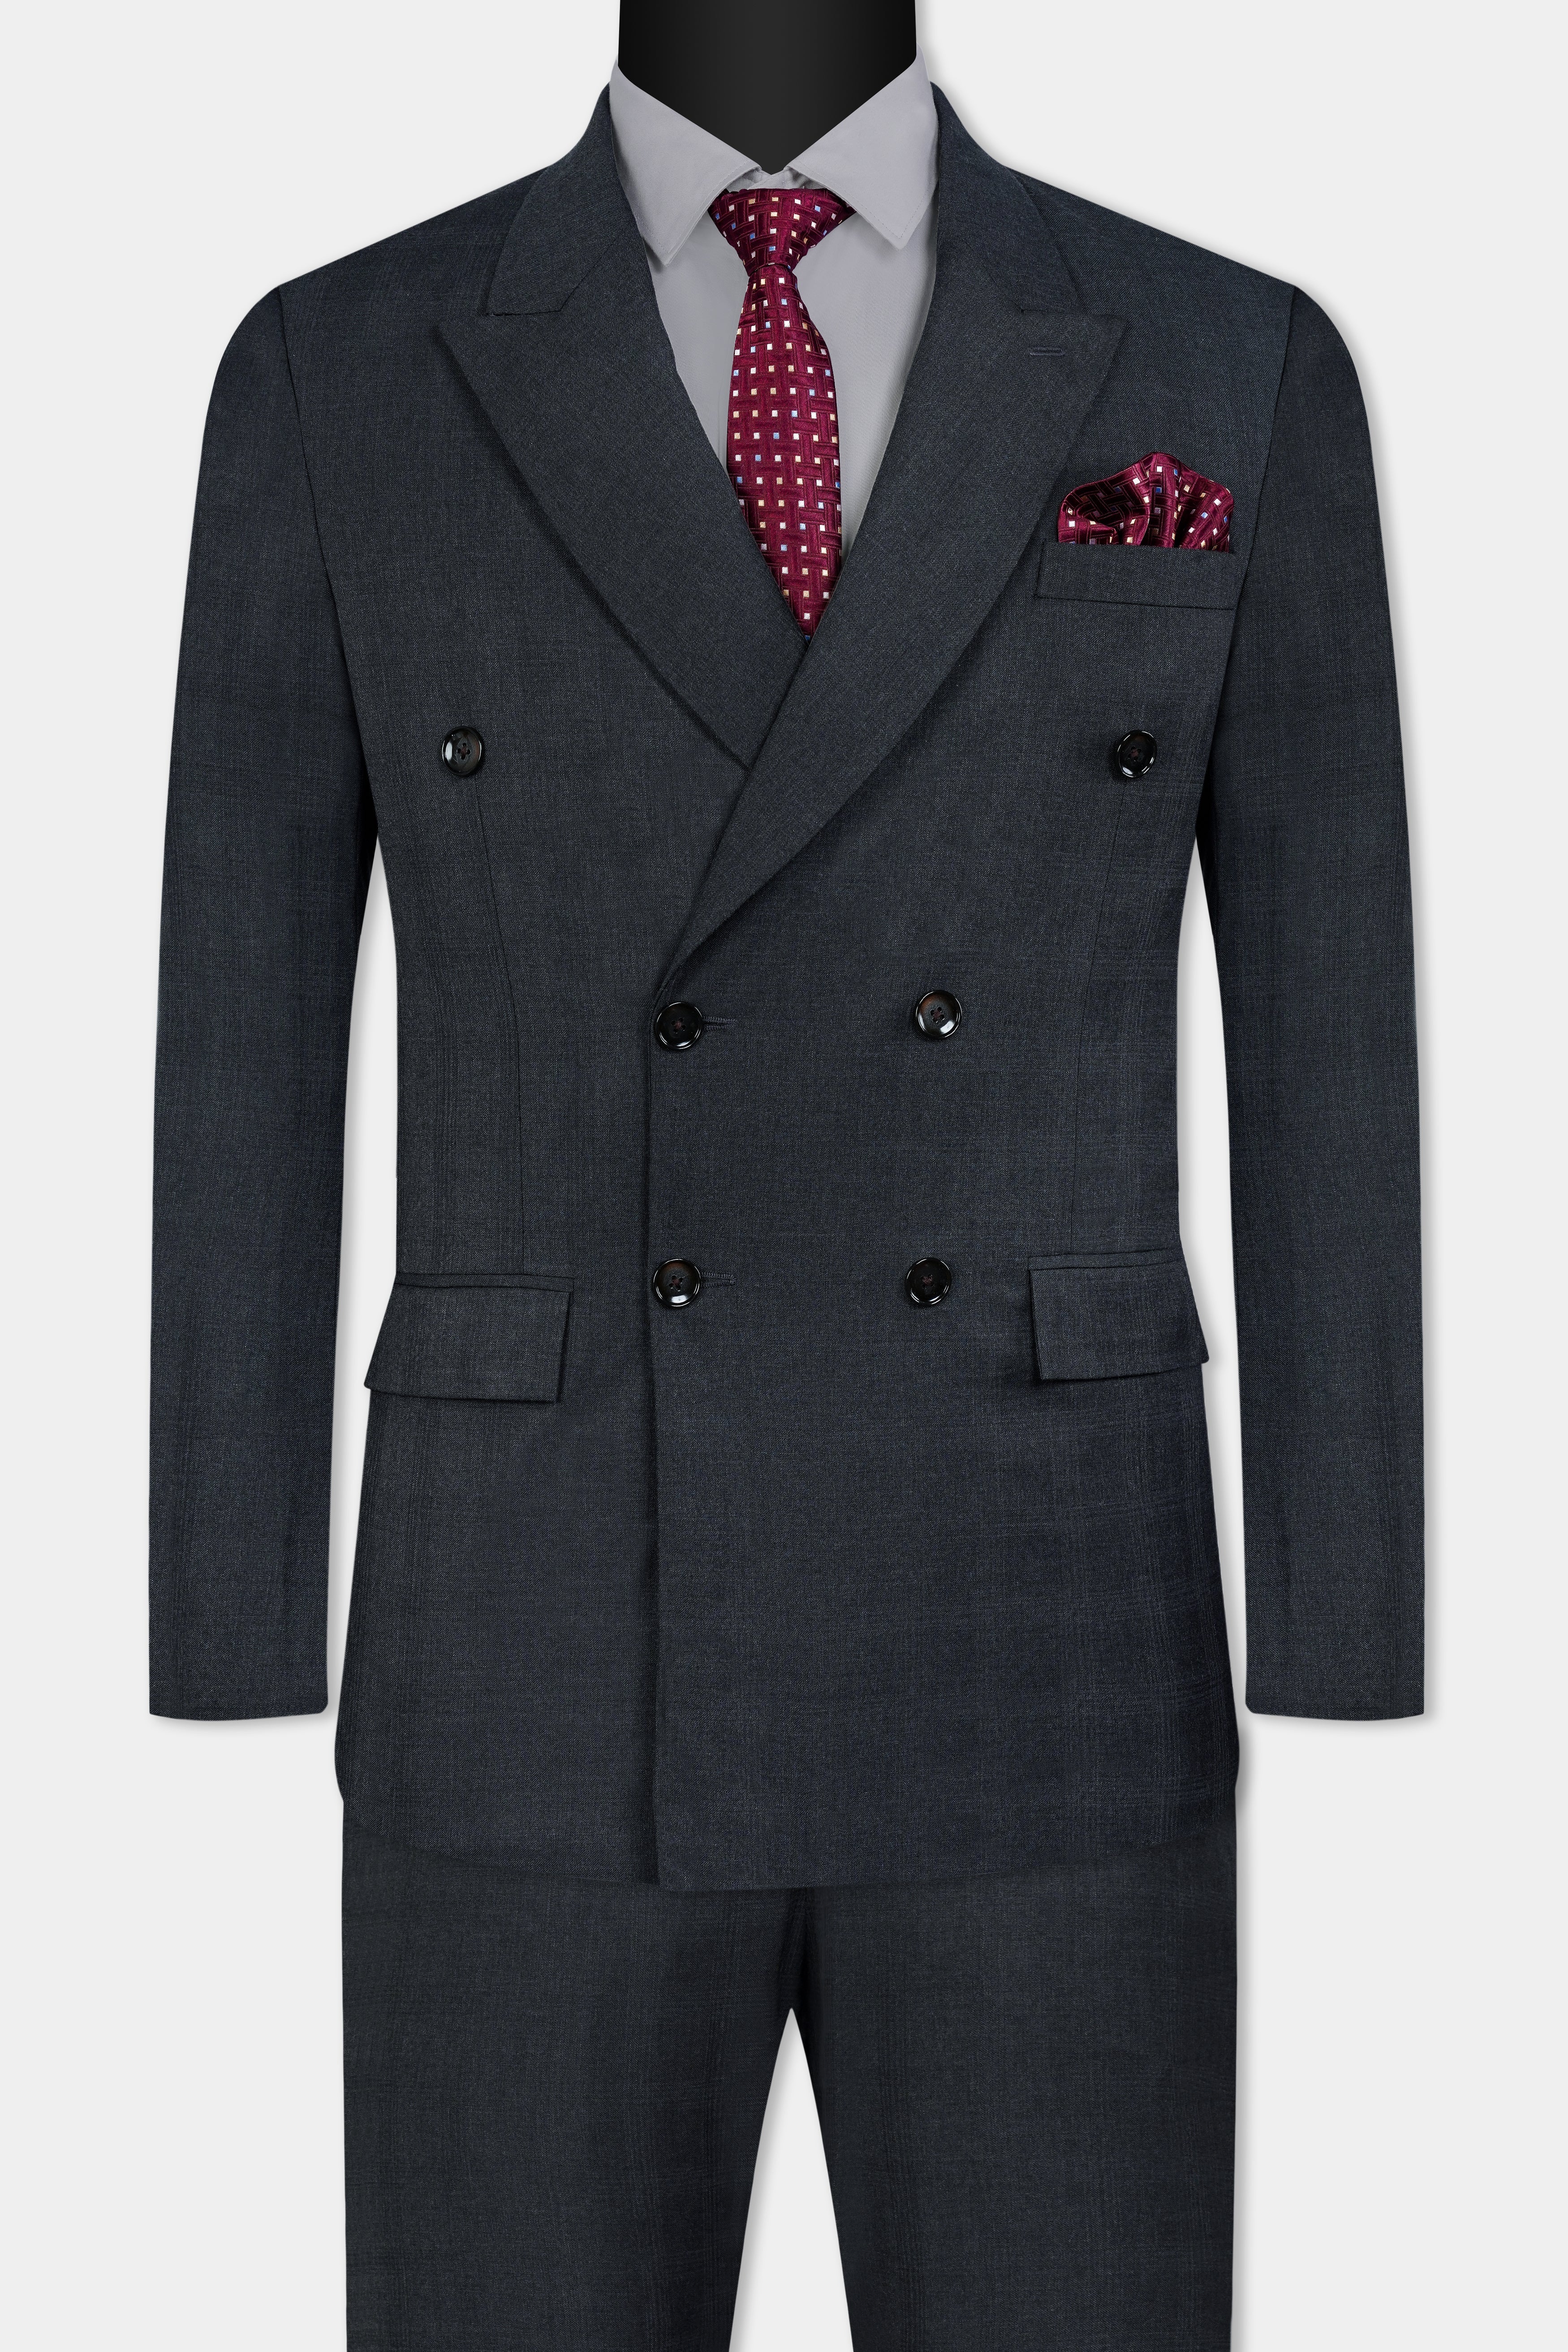 Thunder Gray Checkered Wool Rich Double Breasted Suit ST3093-DB-36, ST3093-DB-38, ST3093-DB-40, ST3093-DB-42, ST3093-DB-44, ST3093-DB-46, ST3093-DB-48, ST3093-DB-50, ST3093-DB-52, ST3093-DB-54, ST3093-DB-56, ST3093-DB-58, ST3093-DB-60